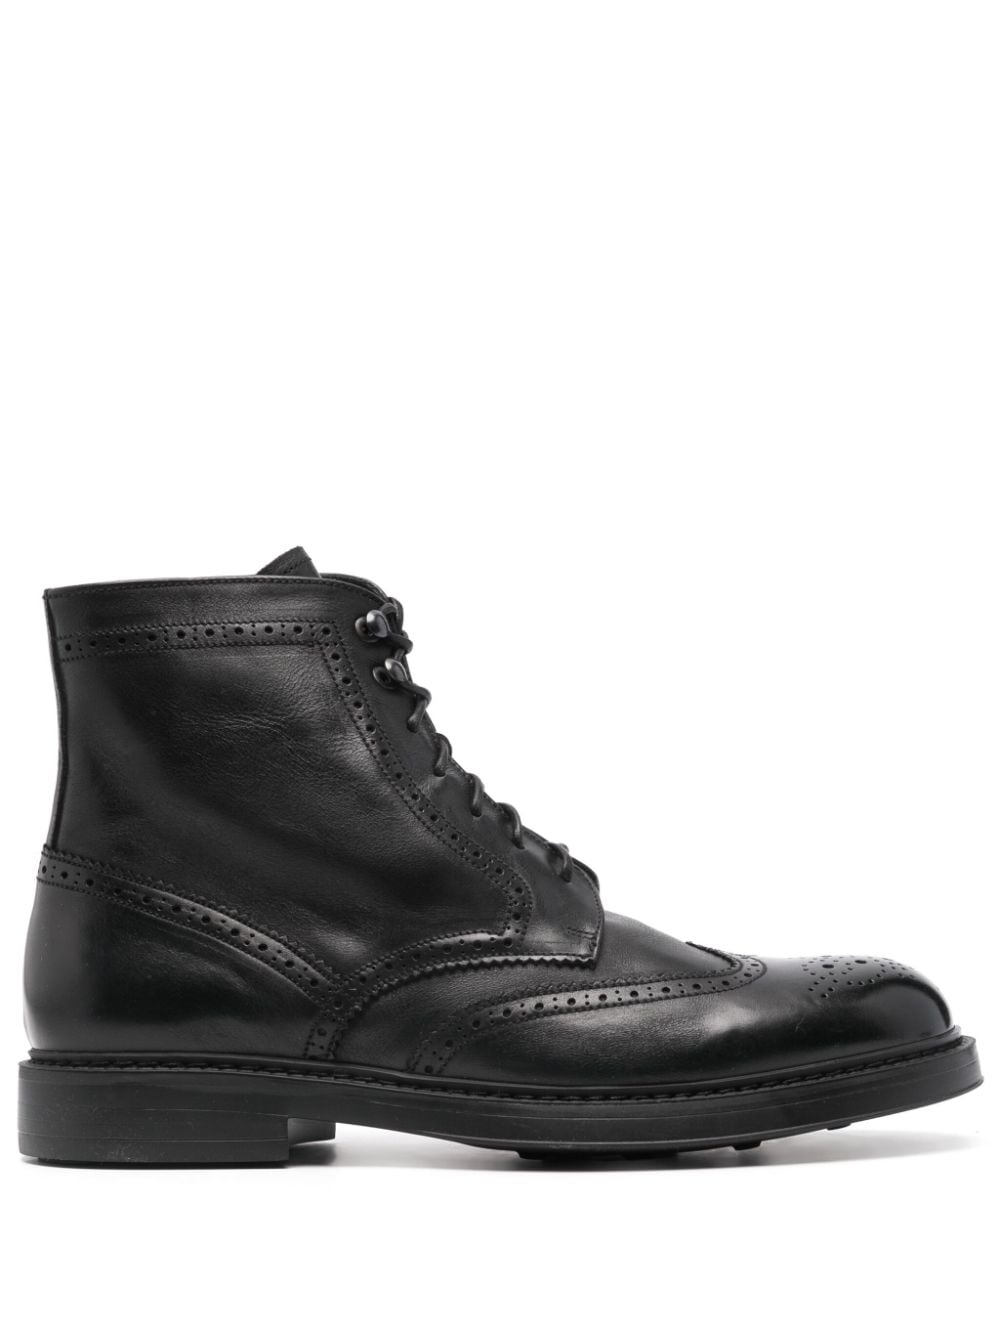 Doucal's perforated-design boots - Black von Doucal's